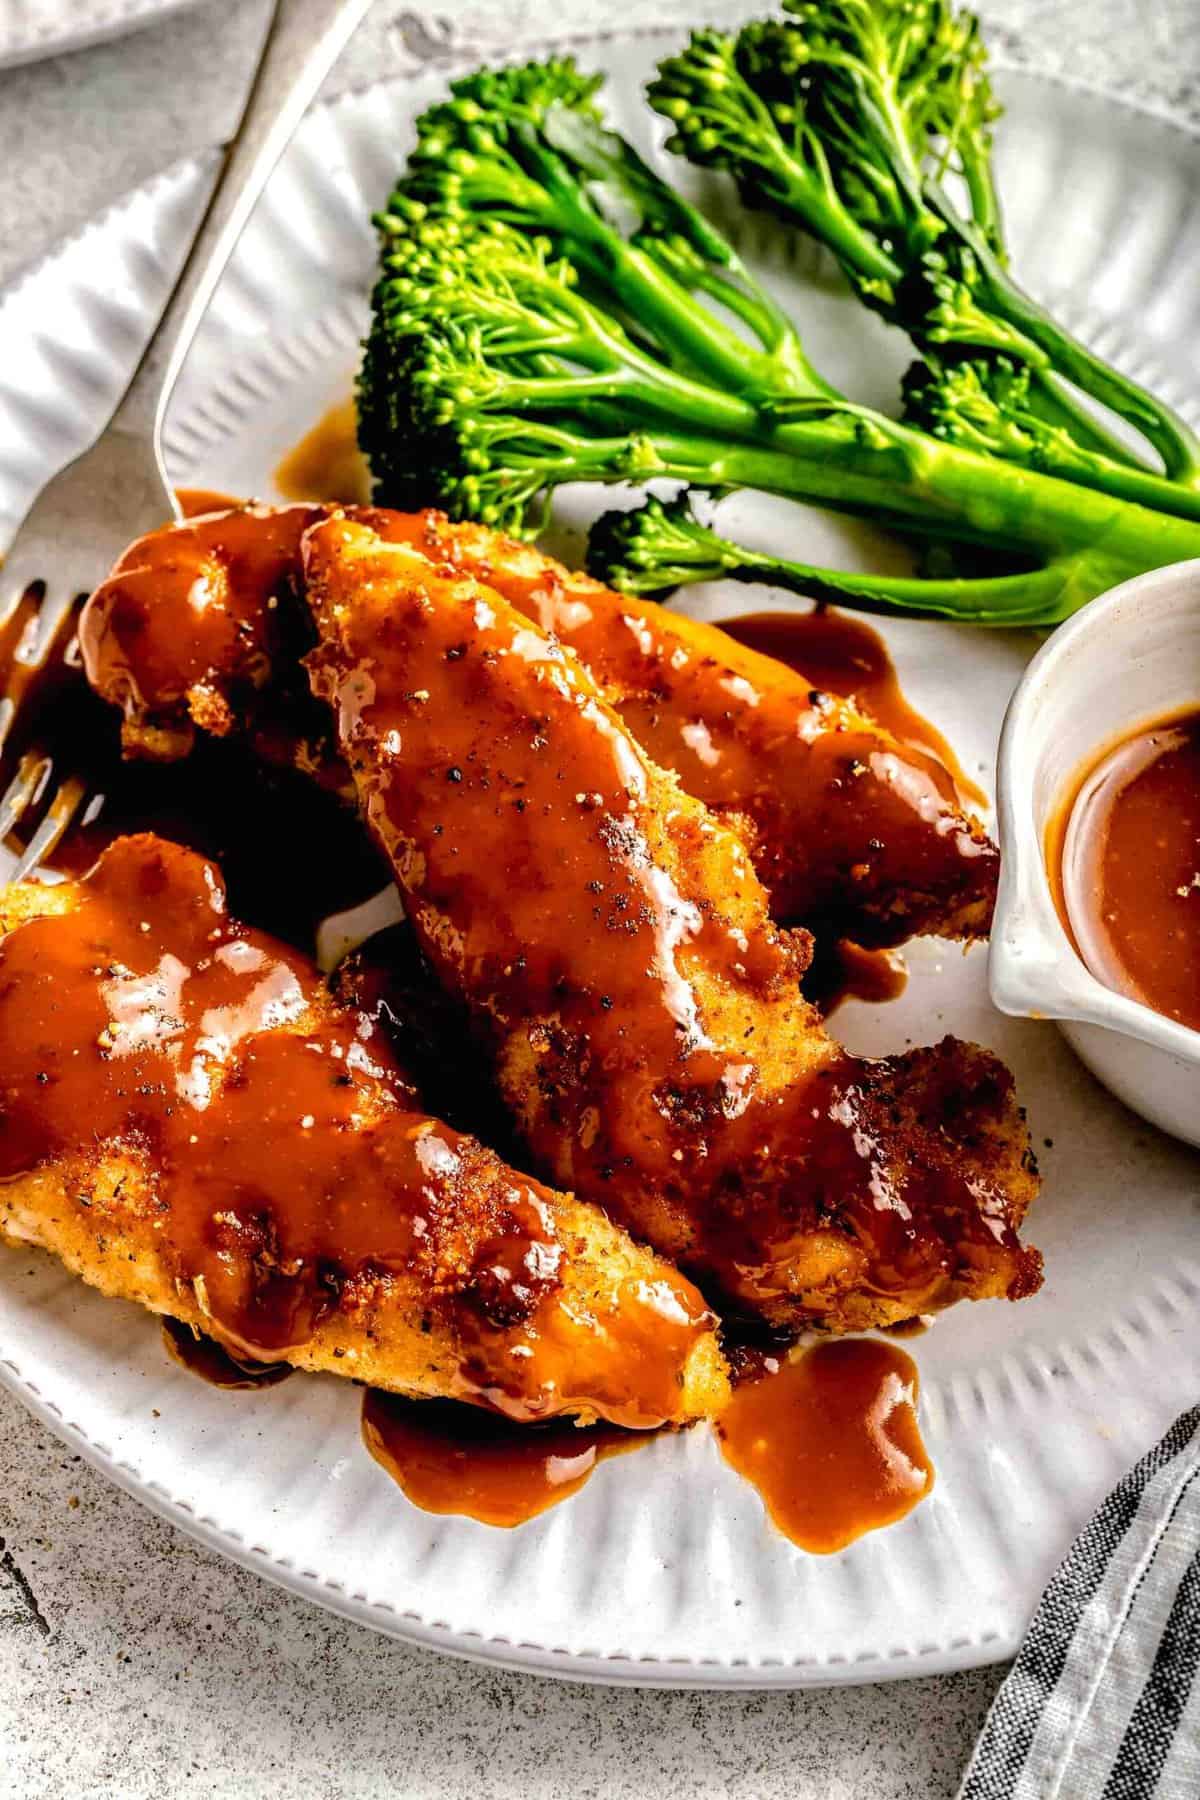 Closeup of bourbon chicken on a plate with broccoli, extra sauce, and a fork.